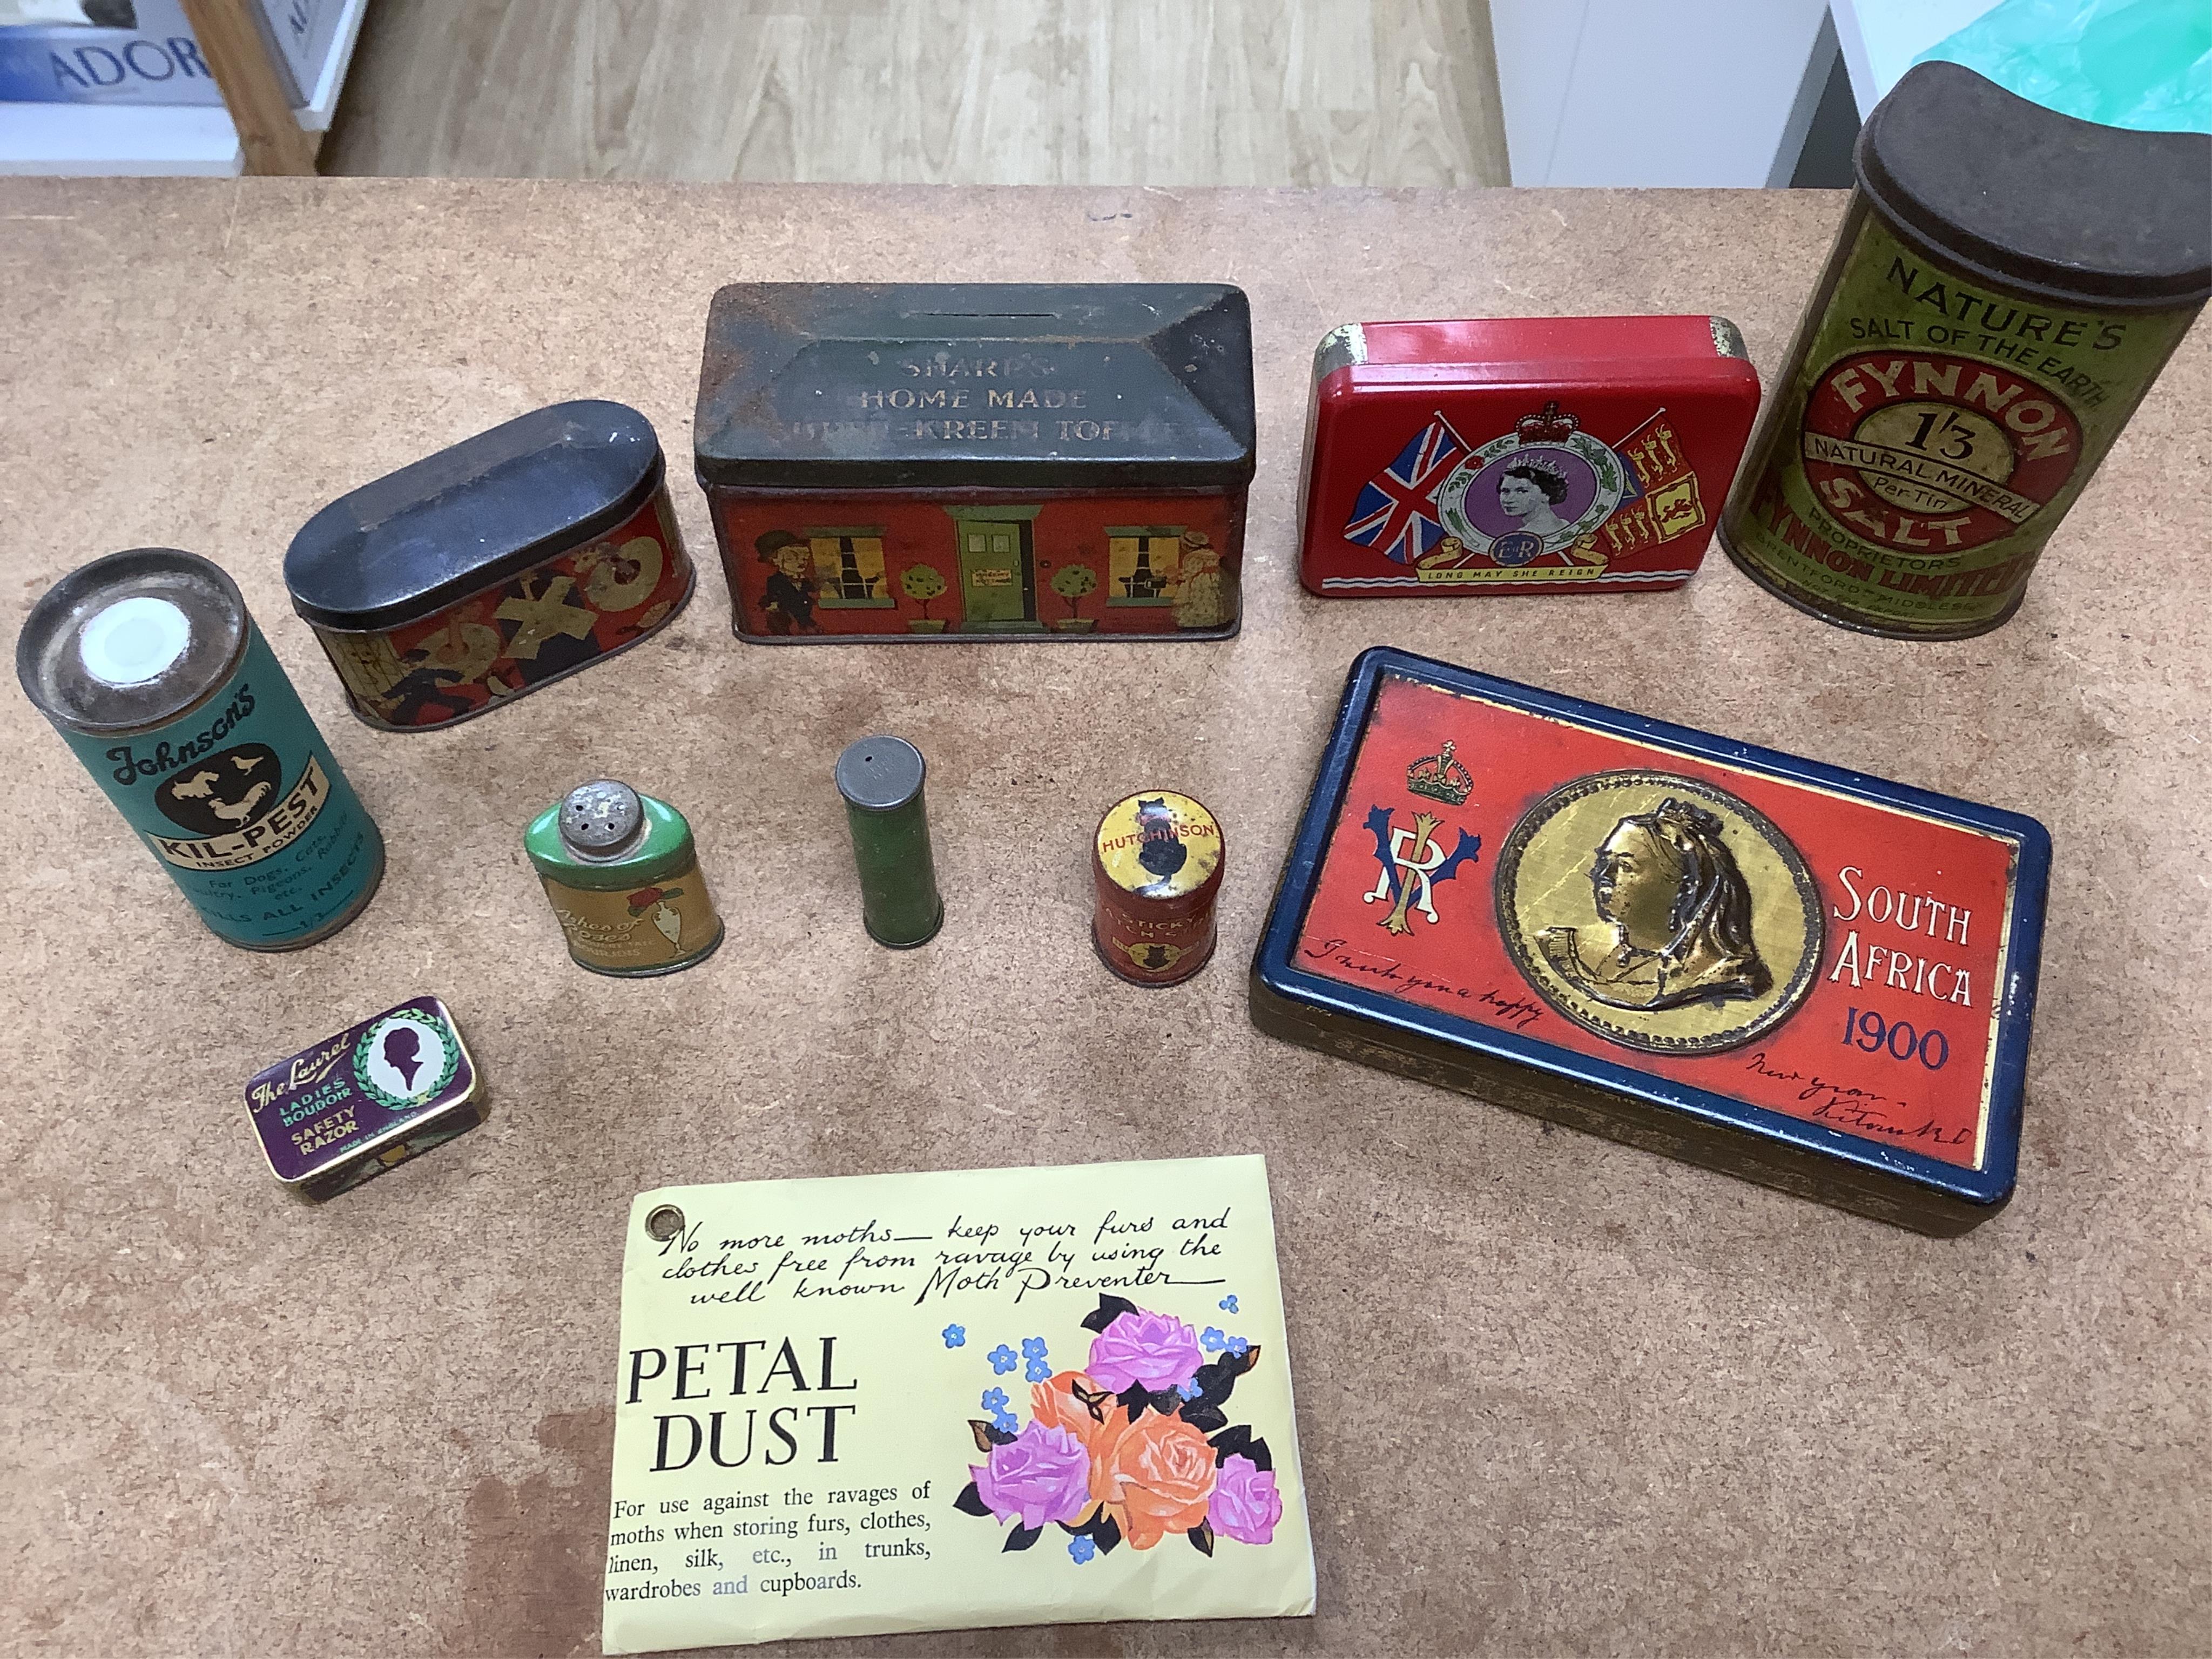 A quantity of early / mid 20th century advertising and confectionery tins. Condition - poor to fair